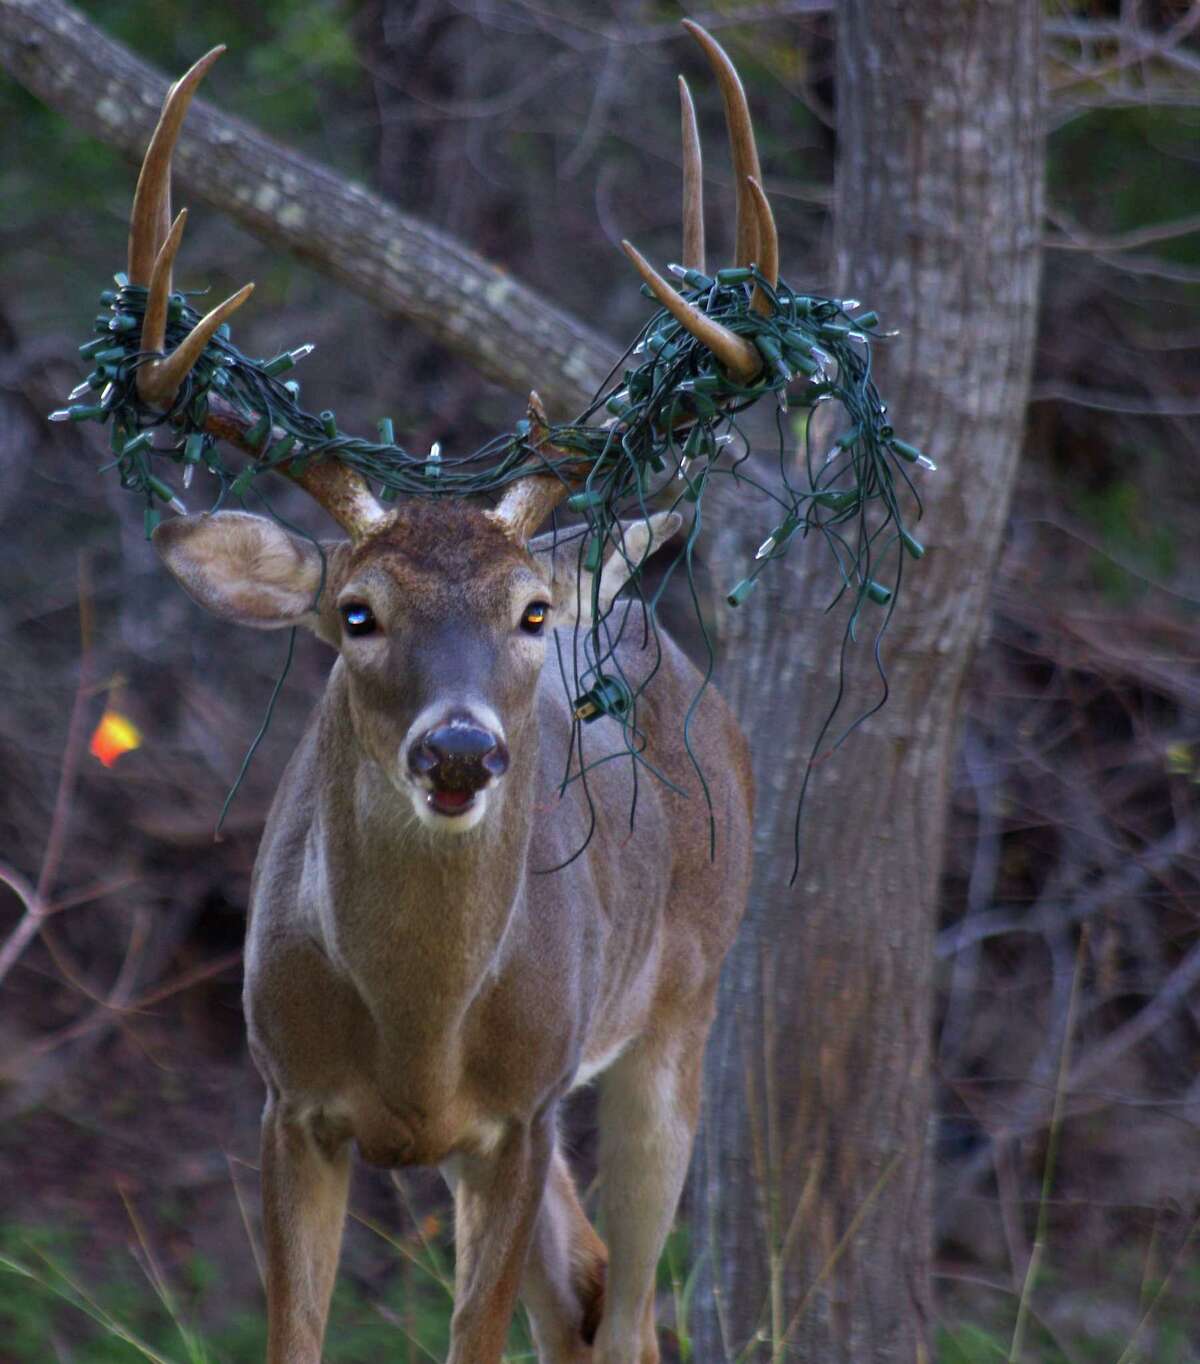 A deer with a string of Christmas lights stuck on its antlers is seen in a picture taken by north San Antonio resident Tim Holder a few weeks ago near his home. Kathleen Stuman, a Bexar County-based Texas Parks and Wildlife Game Warden, said she has seen the deer and the lights don't appear to be causing the animal any harm. The lights will most likely fall off when the deer sheds its antlers in the spring, she said. Though this deer is suffering nothing more than a little embarrassment akin to Rudolph's red nose, Stuman said residents on the fringes of the city should be cautious when placing objects like Christmas decorations, toys and patio furniture in their yards as it is not uncommen for game wardends to see deer in distress. "I've had one (deer) running down the street with a whole kids soccer net, with the poles and everything," Stuman said of a deer that was not as lucky as this one.